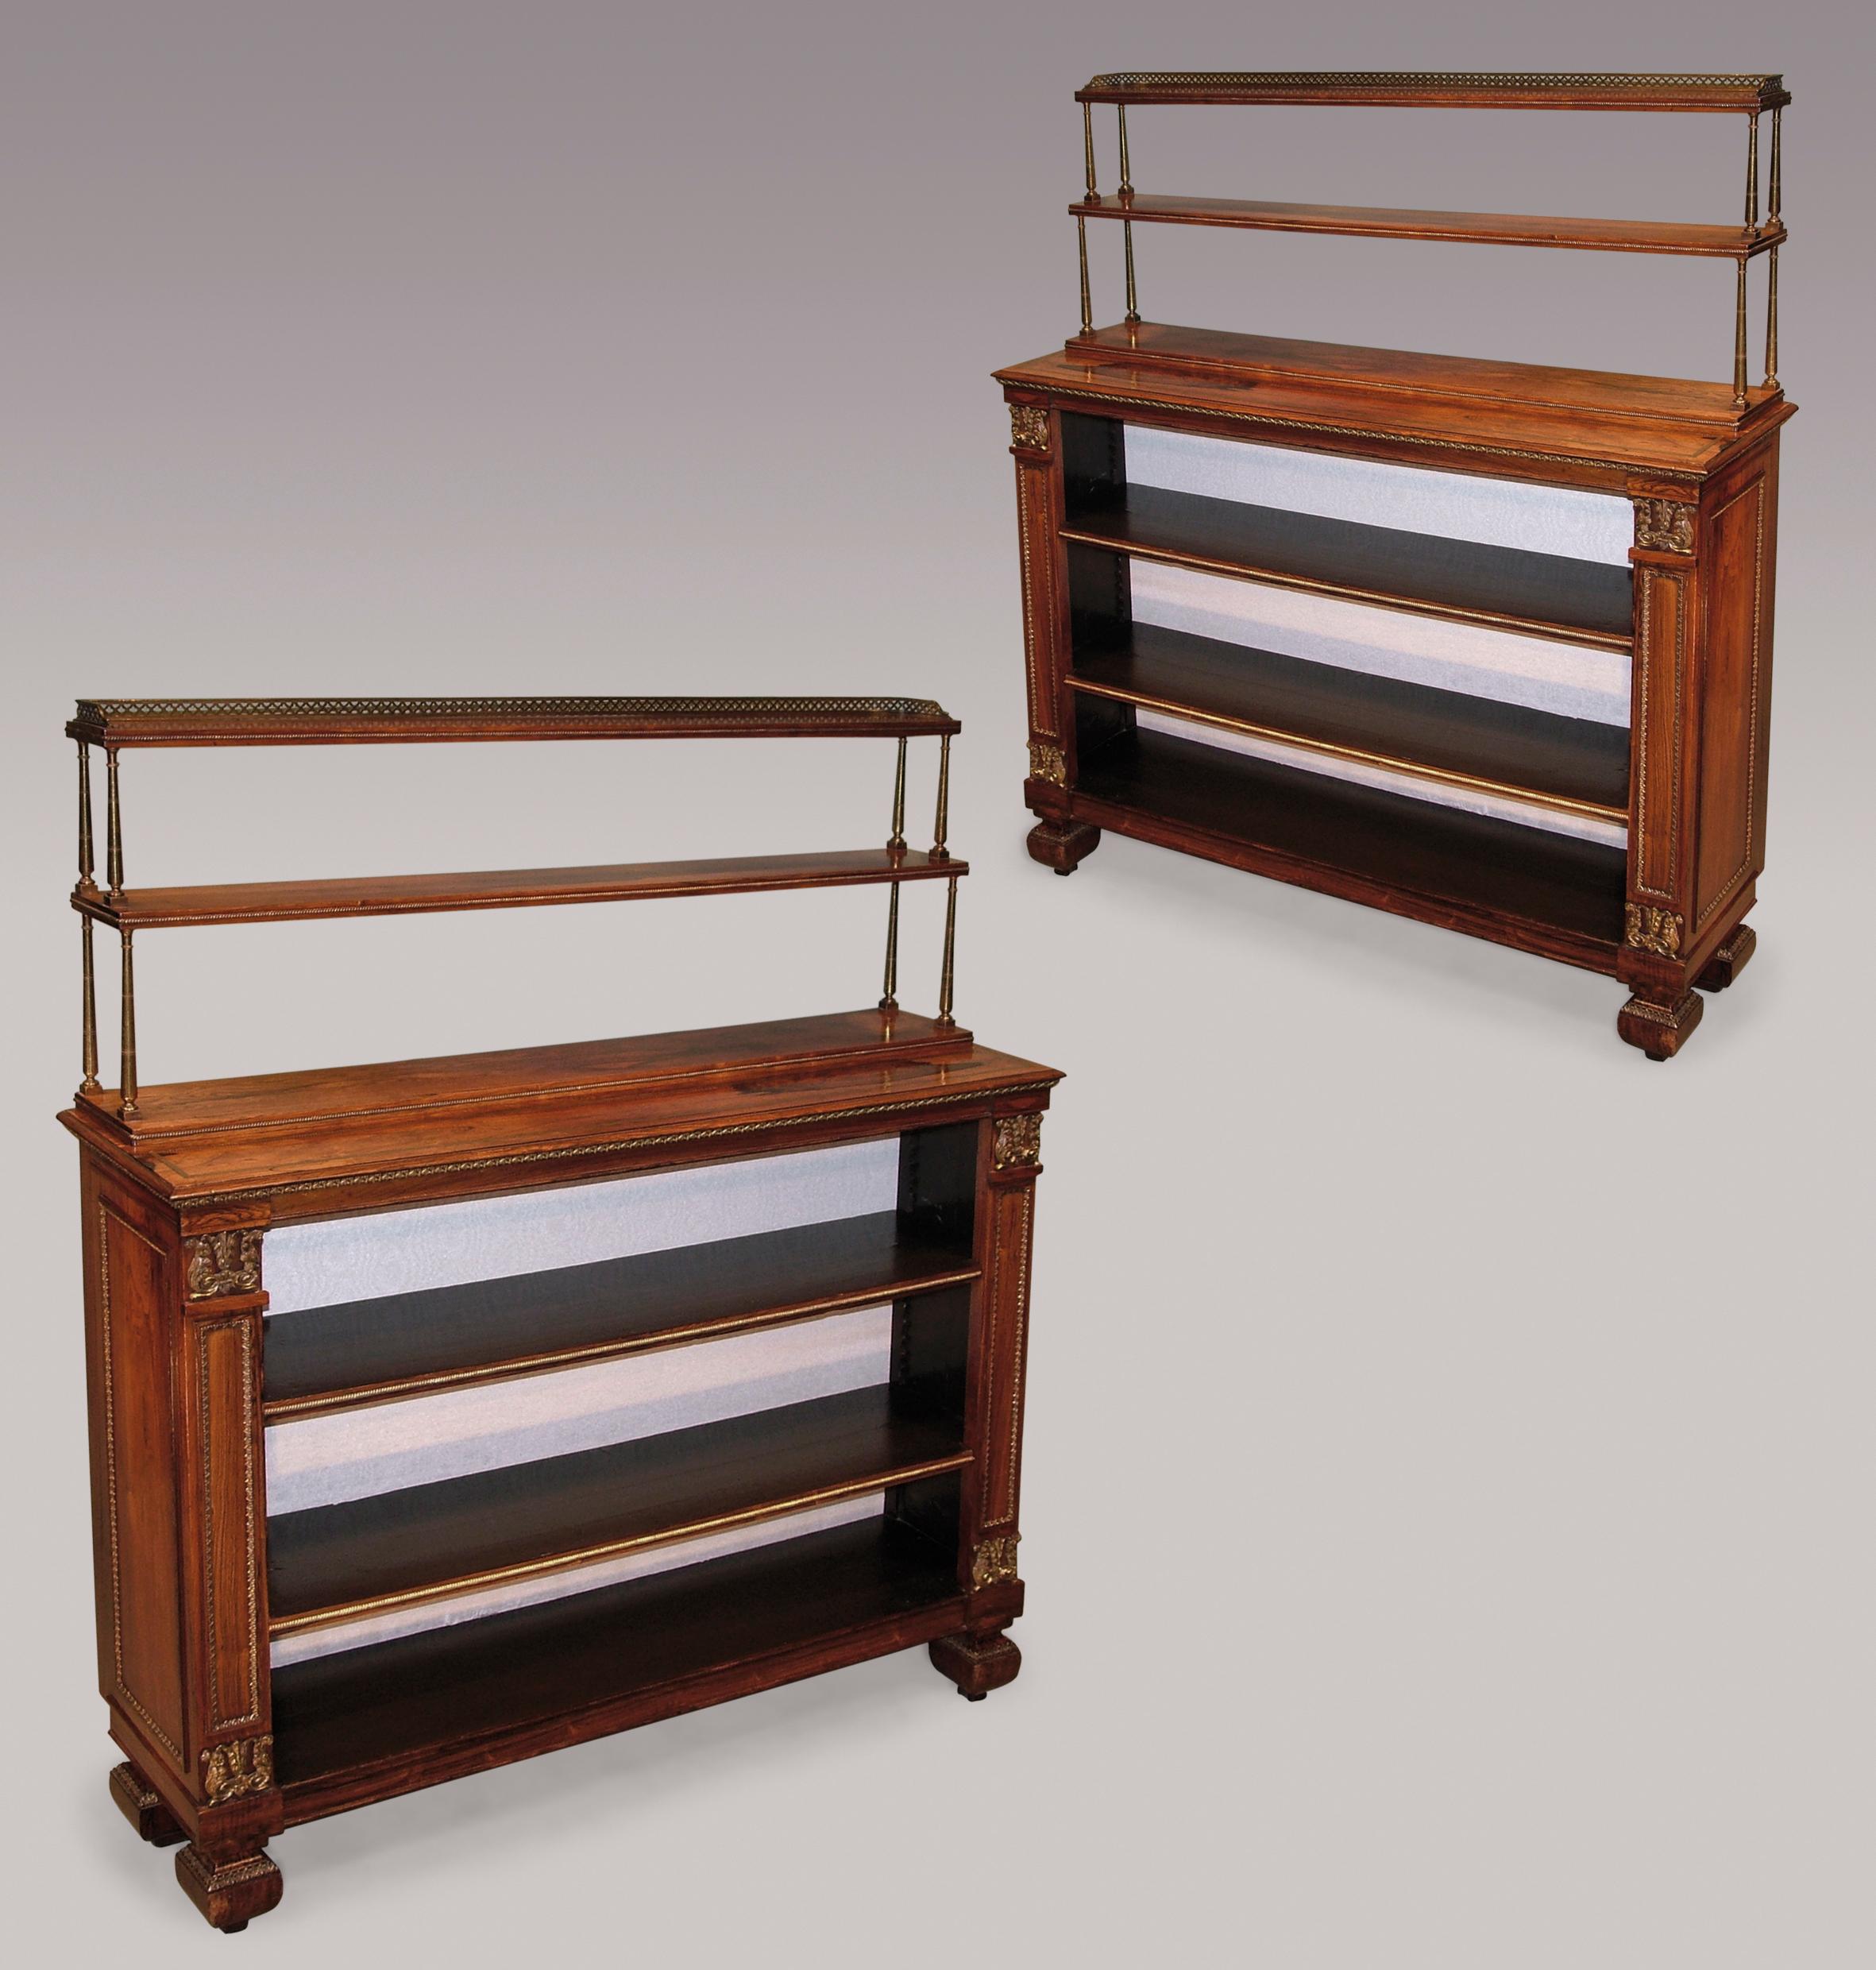 A fine quality pair of early 19th century Regency period rosewood open bookshelves, having gilt brass columned superstructures mounted with pierced galleries and inset beading, above brass inlaid moulded edged tops, the shelves flanked by paneled